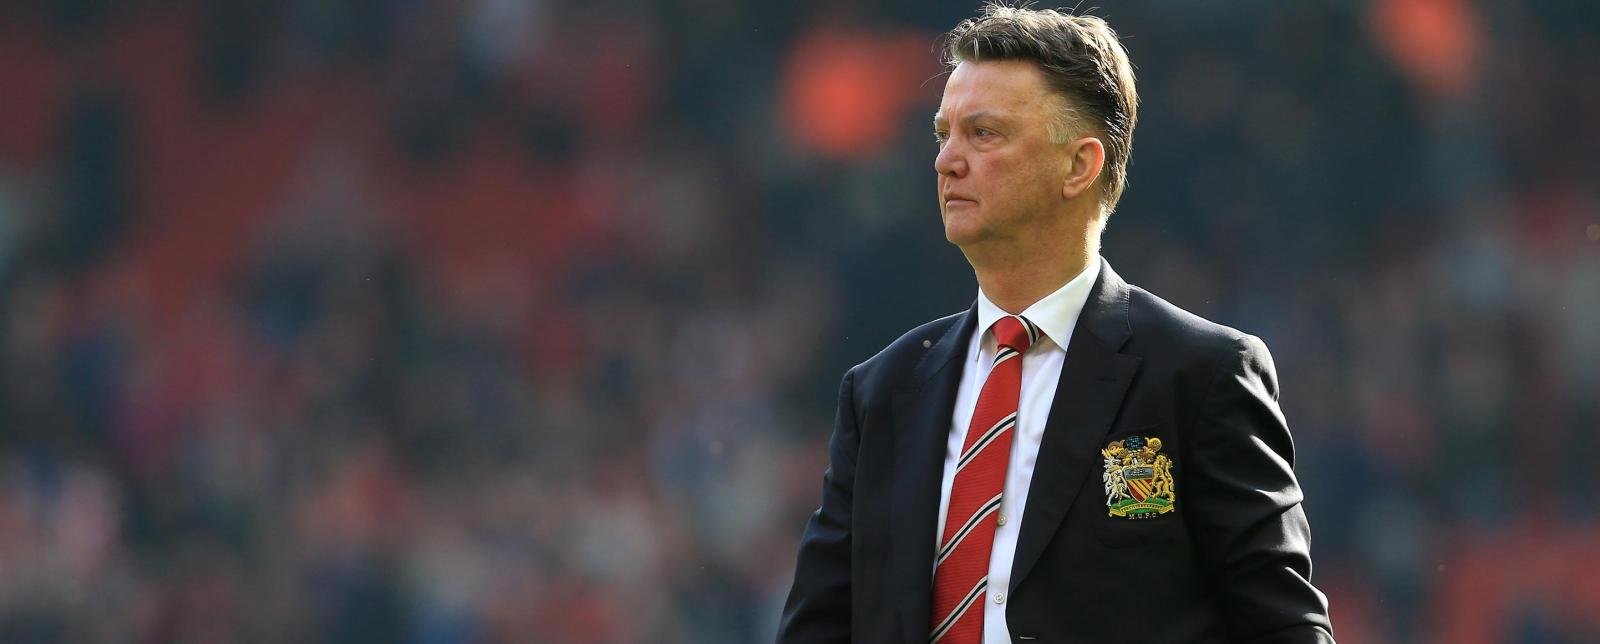 Summer transfers show Man United are on the mend under LVG